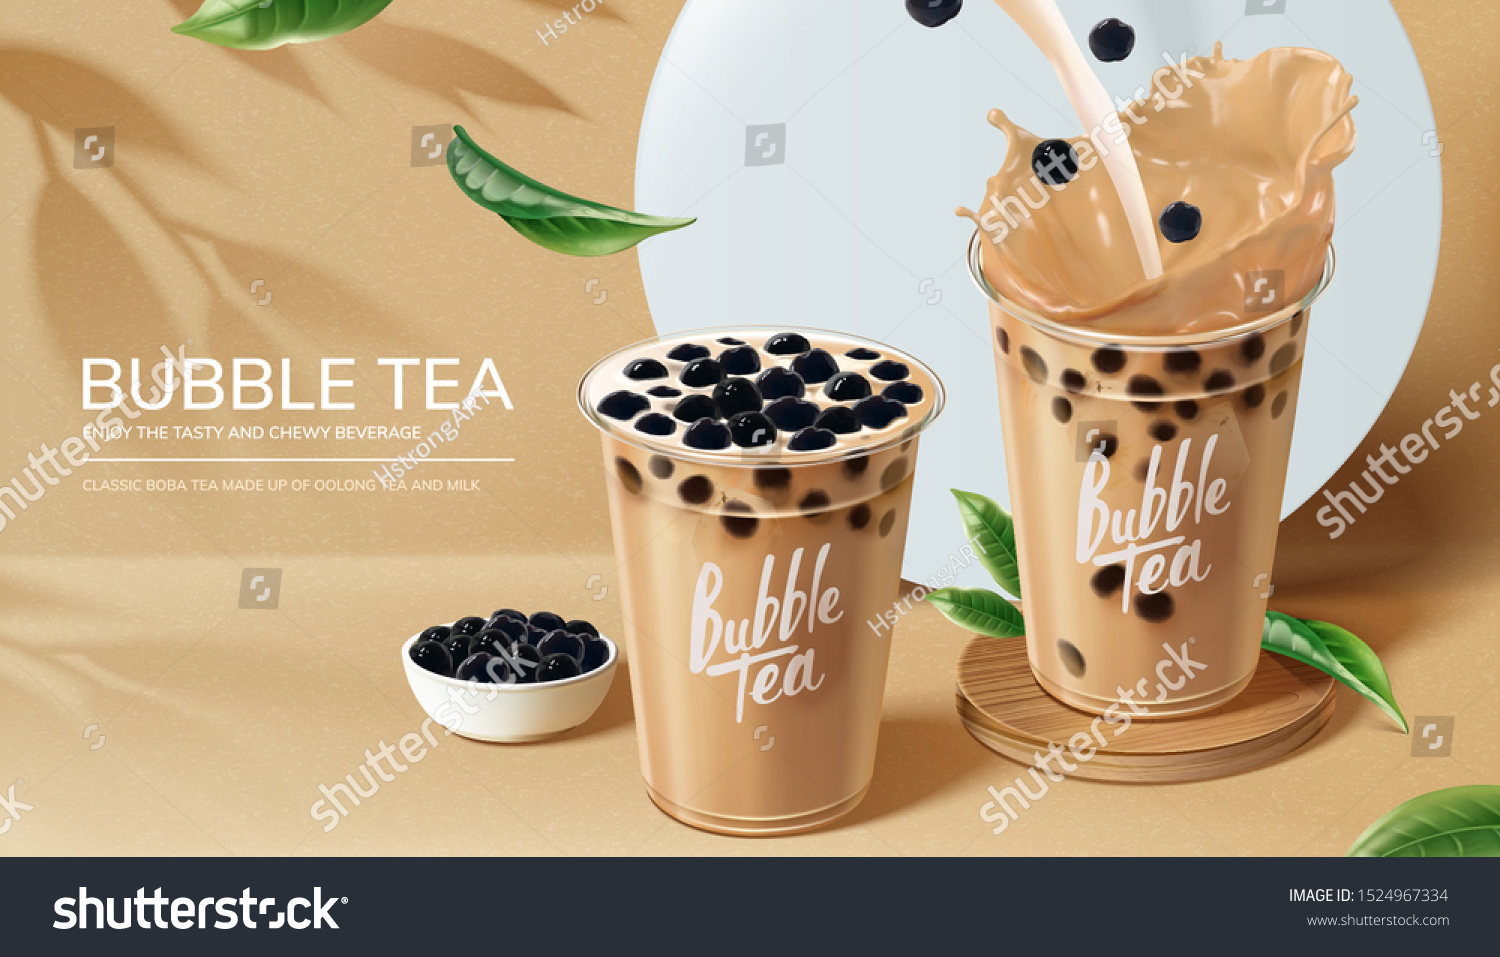 stock-vector-bubble-milk-tea-ads-with-pouring-milk-in-d-illustration-1524967334